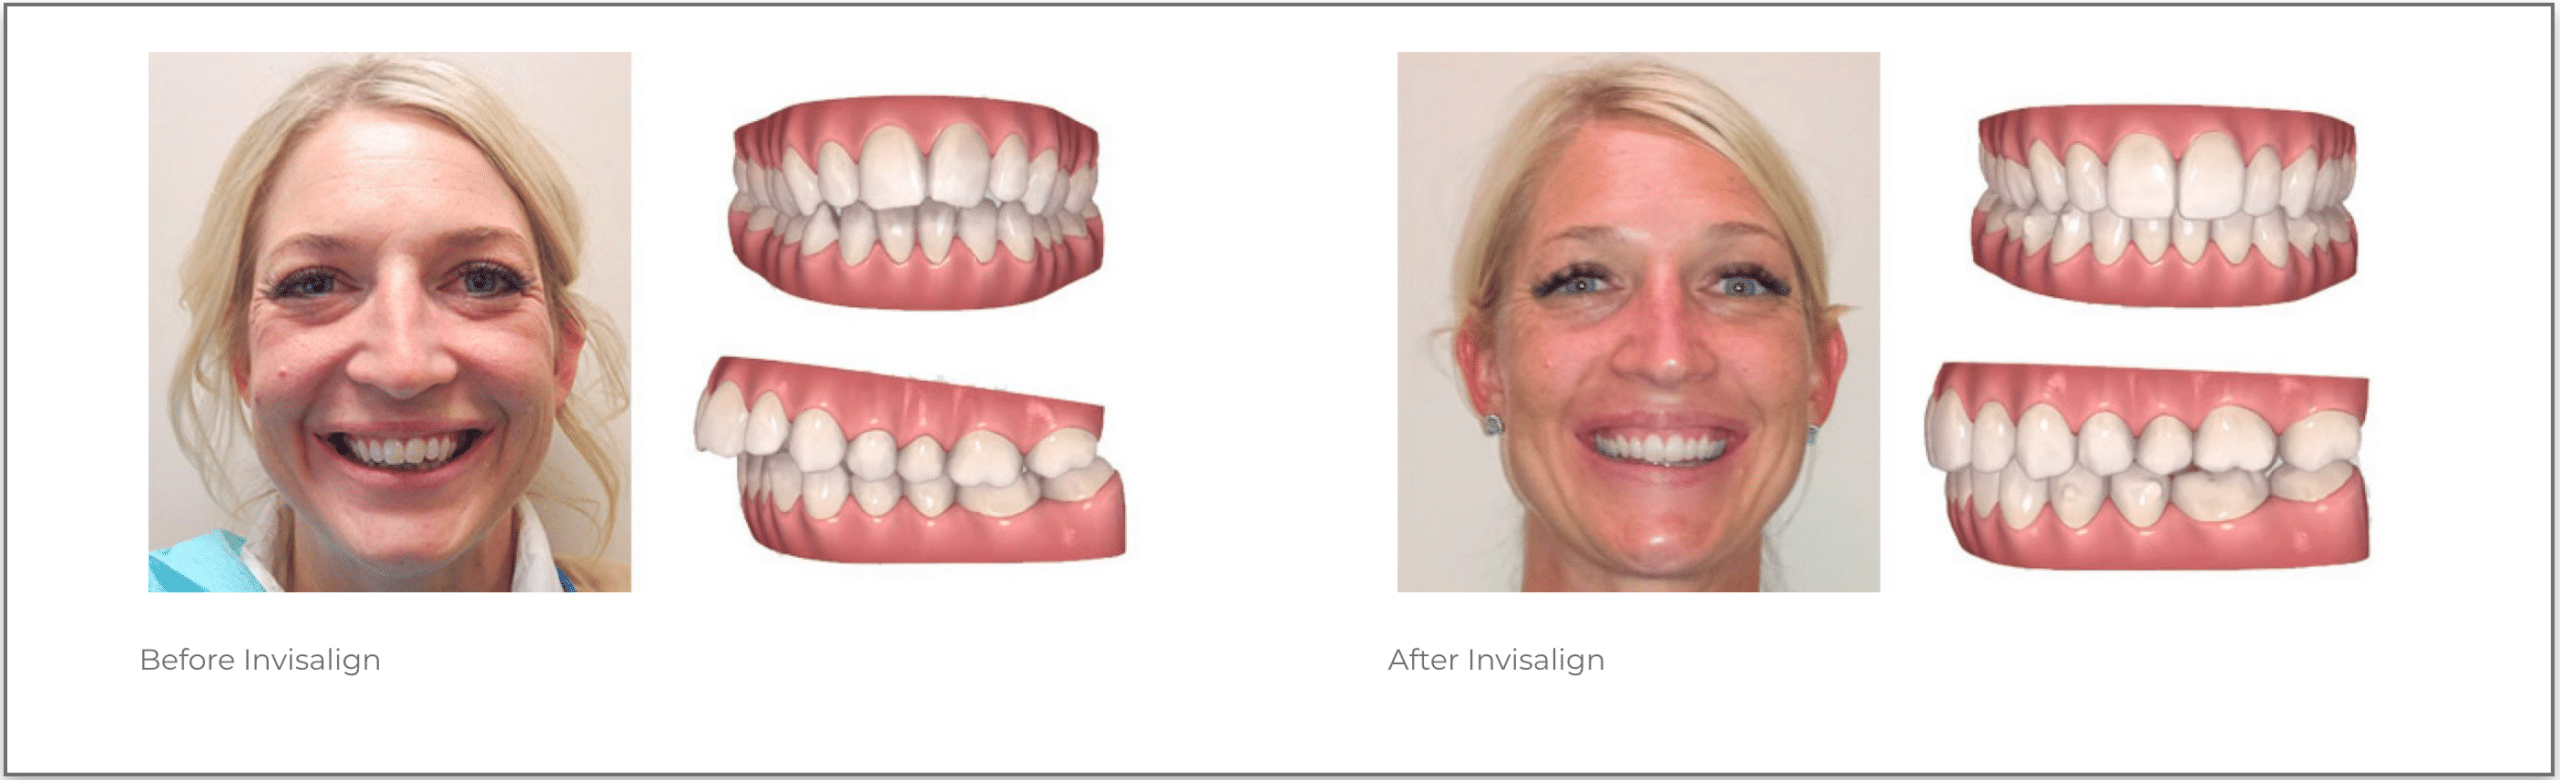 Invisible Braces, Visible Results: Why Invisalign® is the Clear